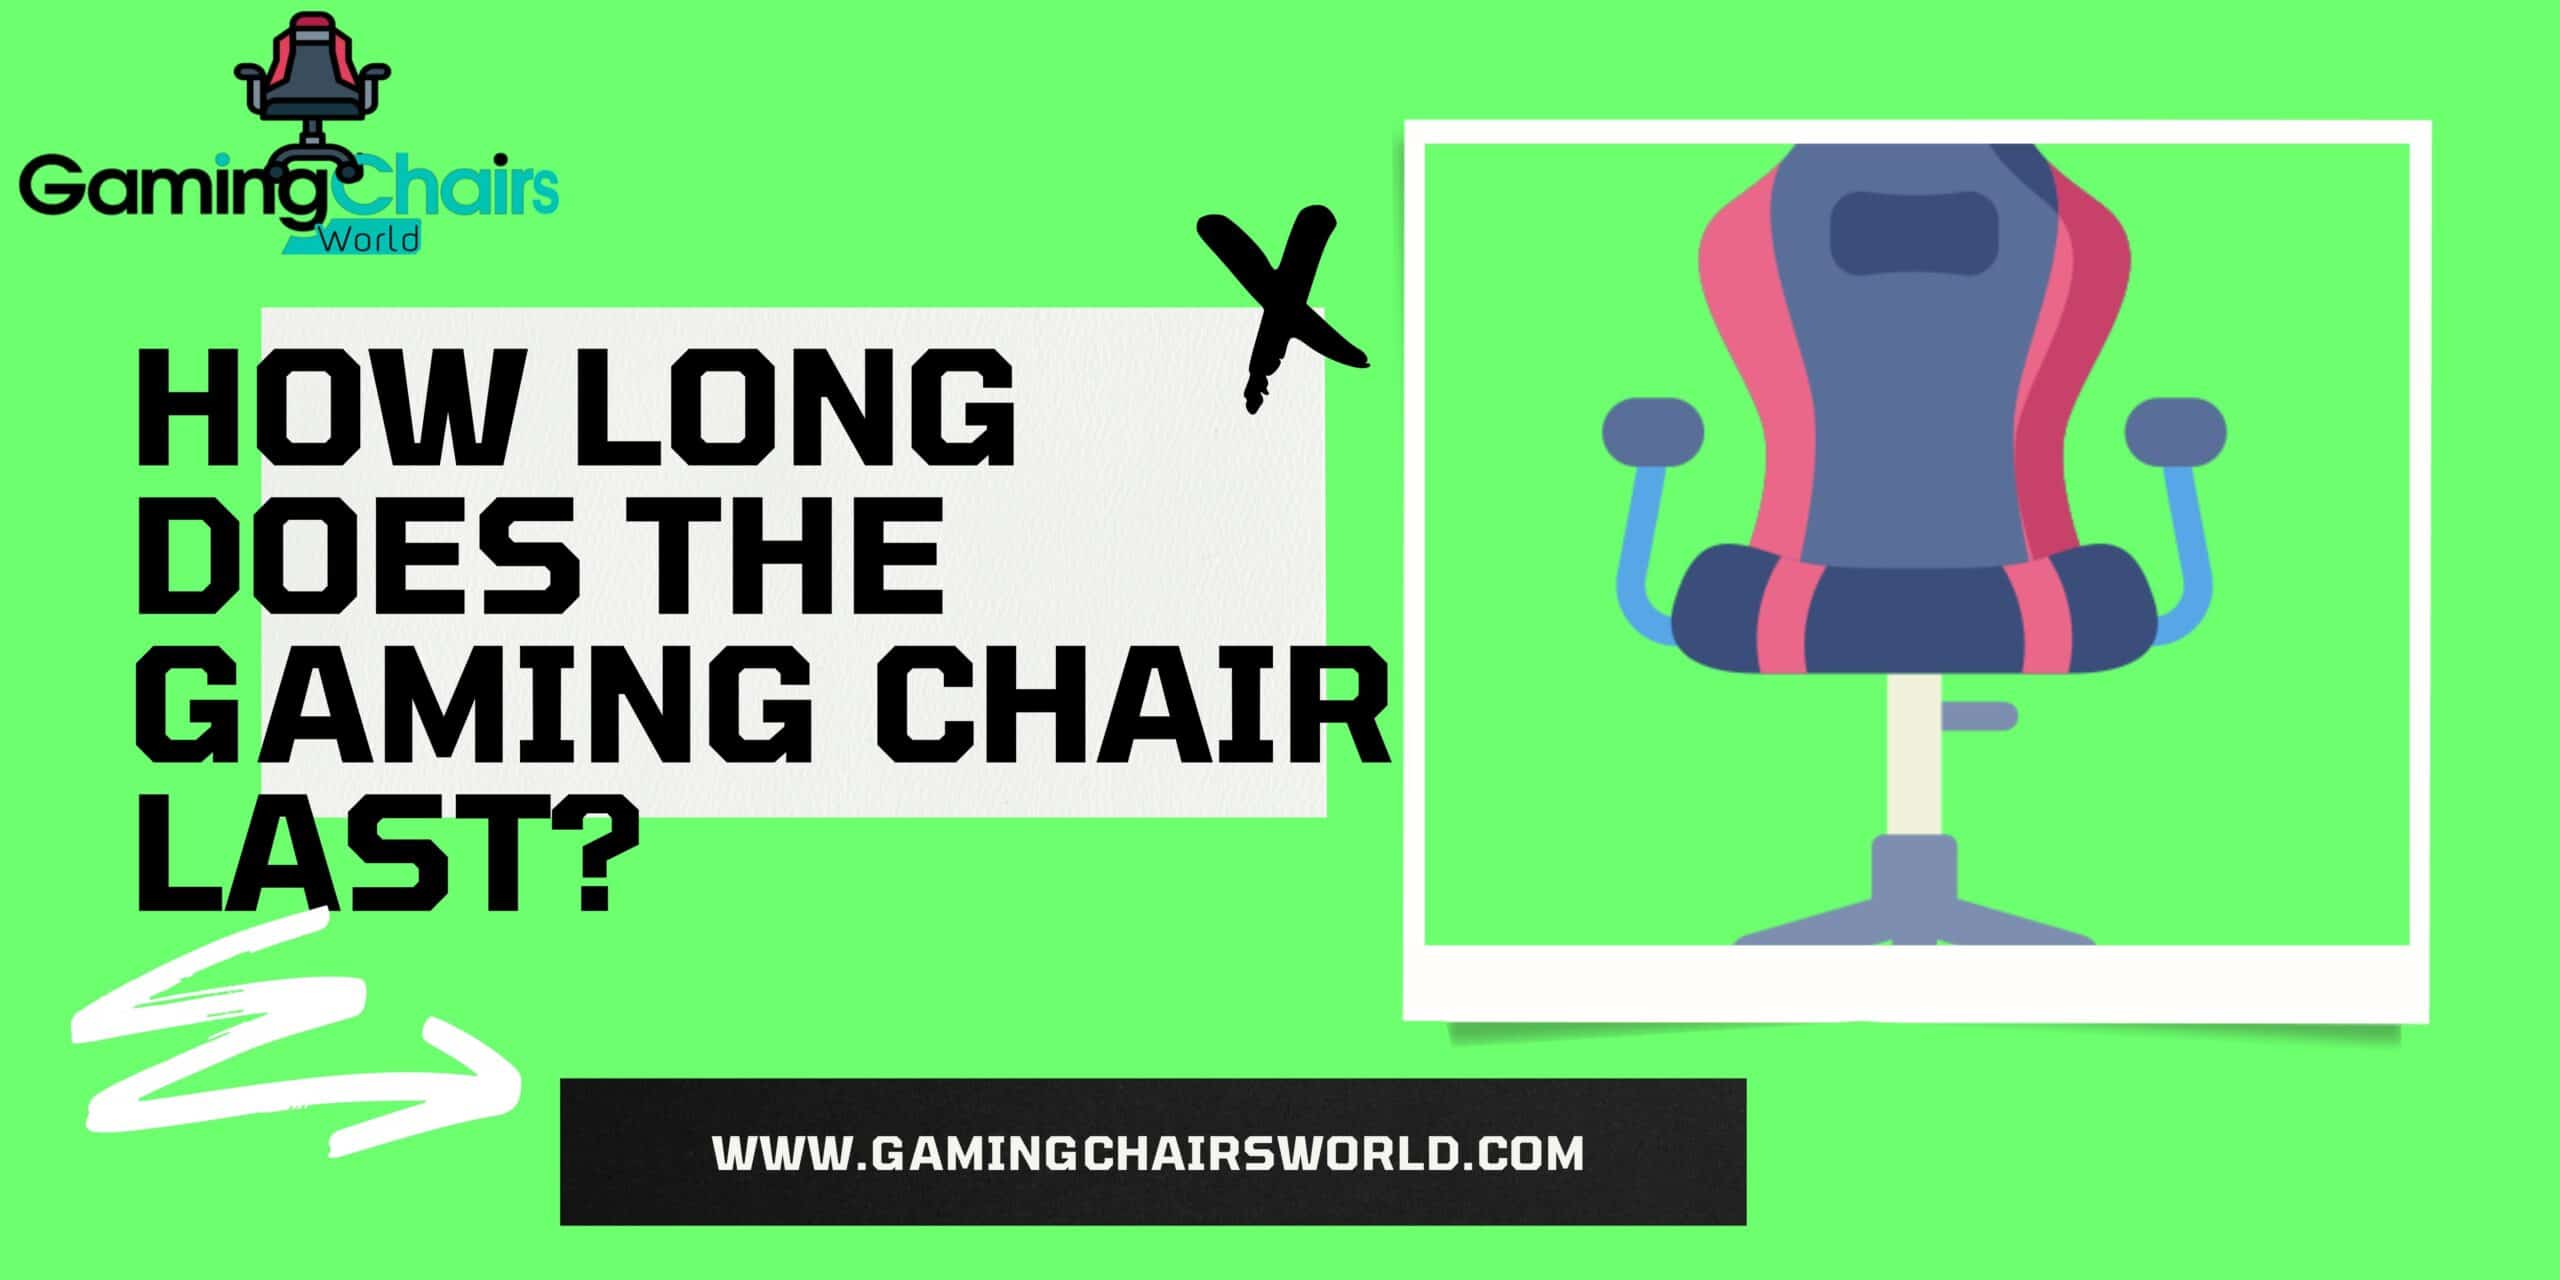 How long does the gaming chair last?